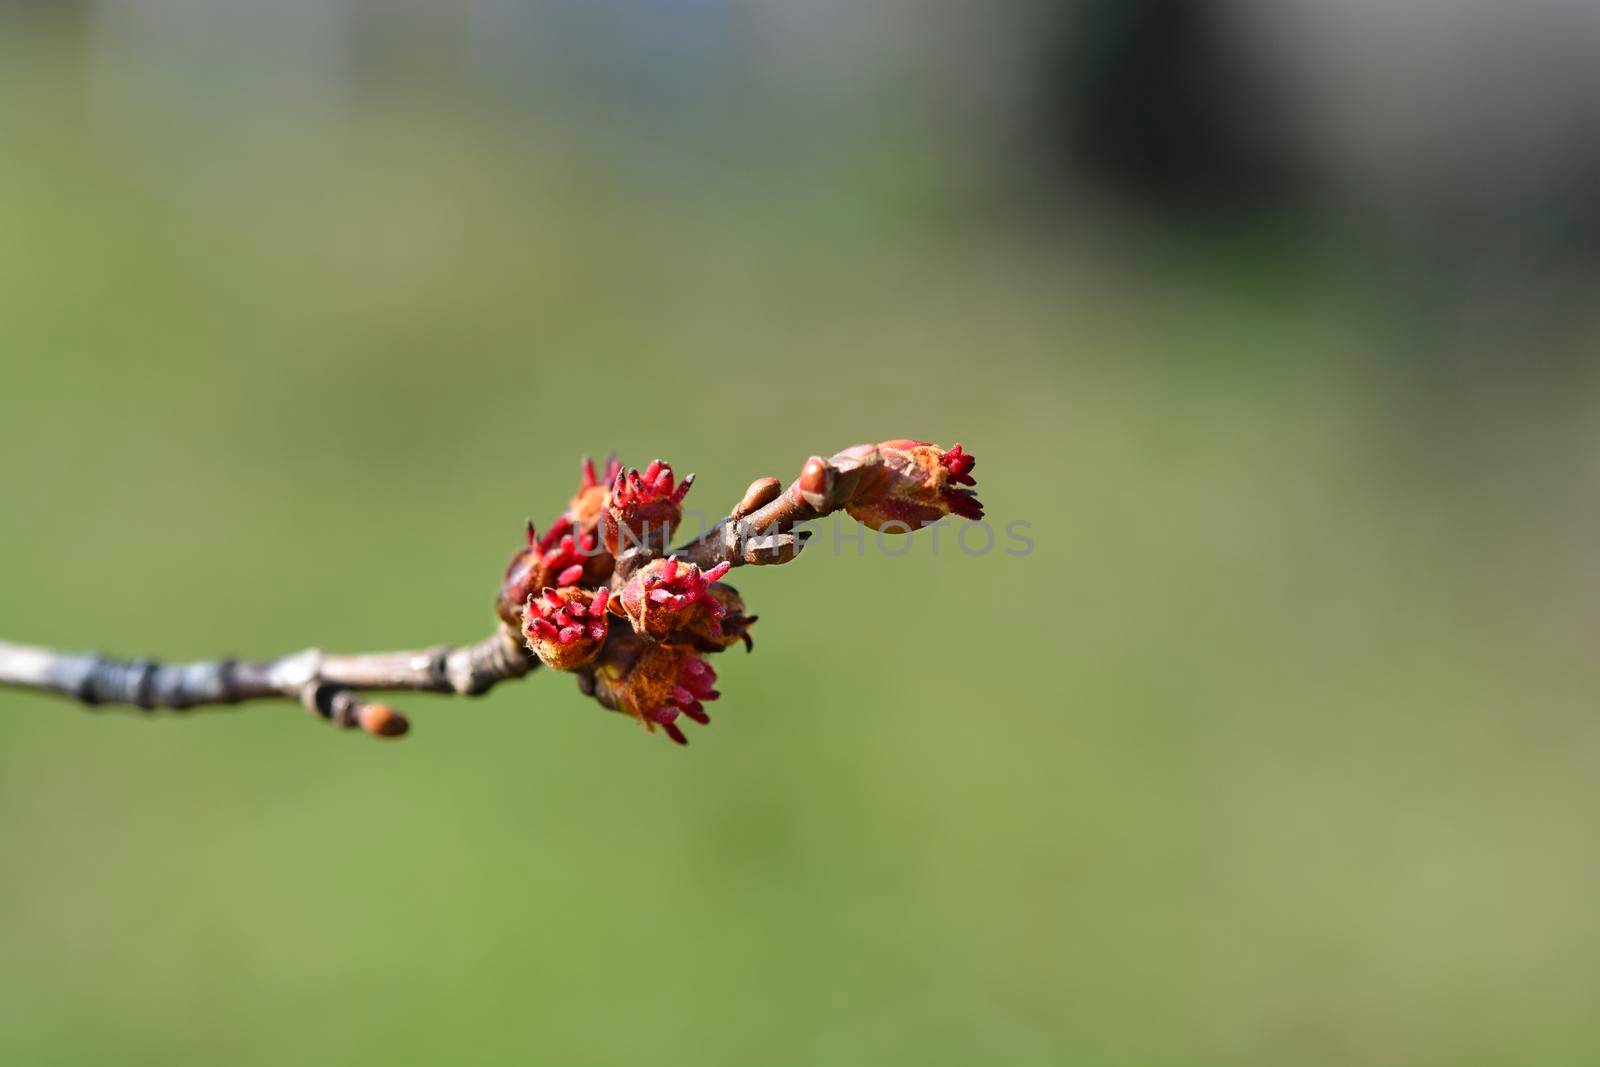 Silver maple branch with flowers - Latin name - Acer saccharinum